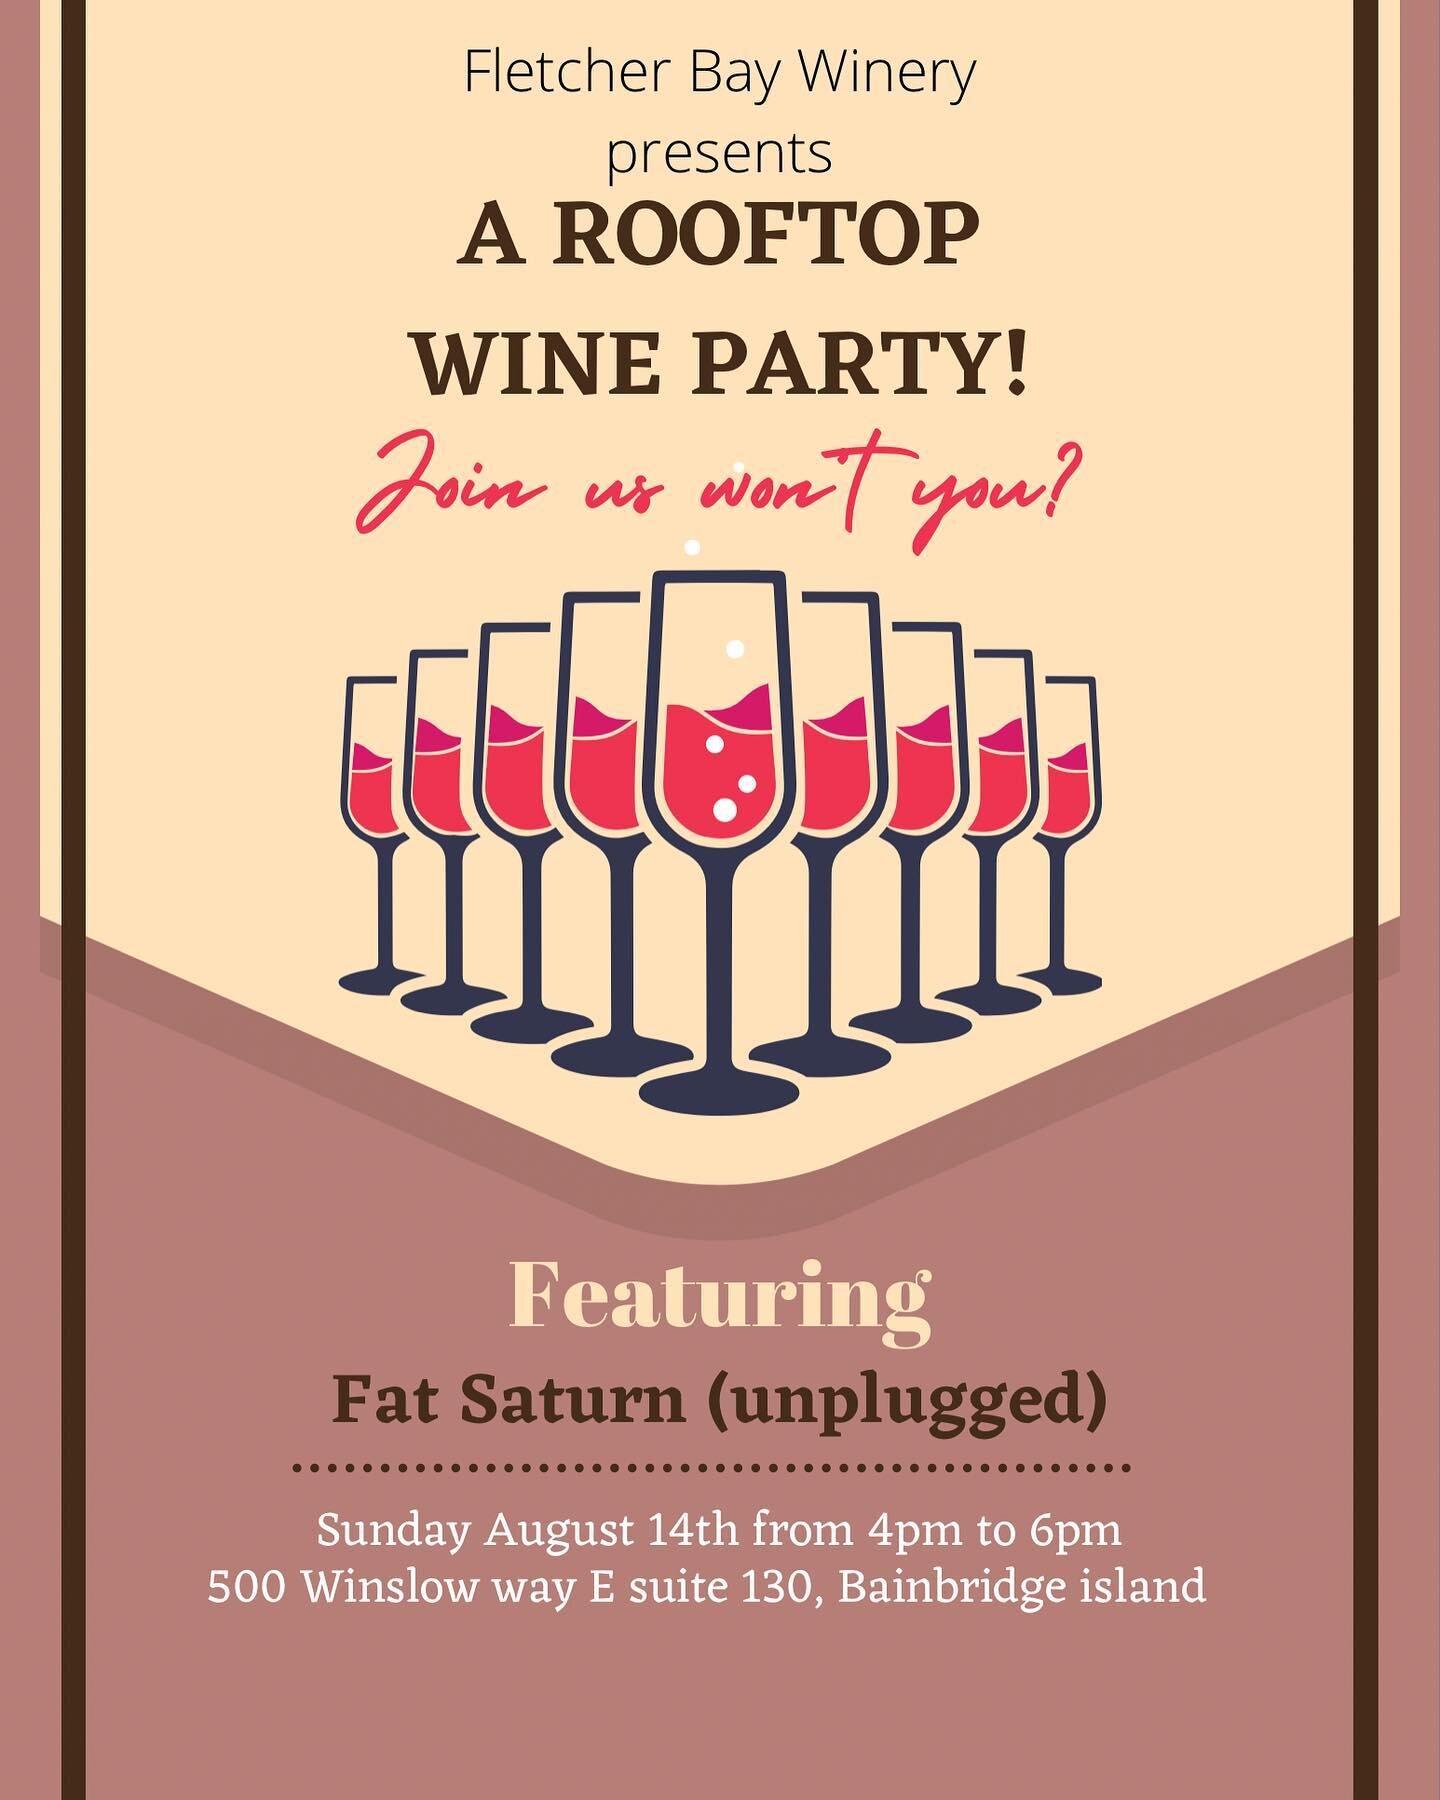 Join  @fat_saturn as we play some rock n roll gems on a beautiful rooftop on Bainbridge island!
@fletcherbaywinery 4 to 6pm!